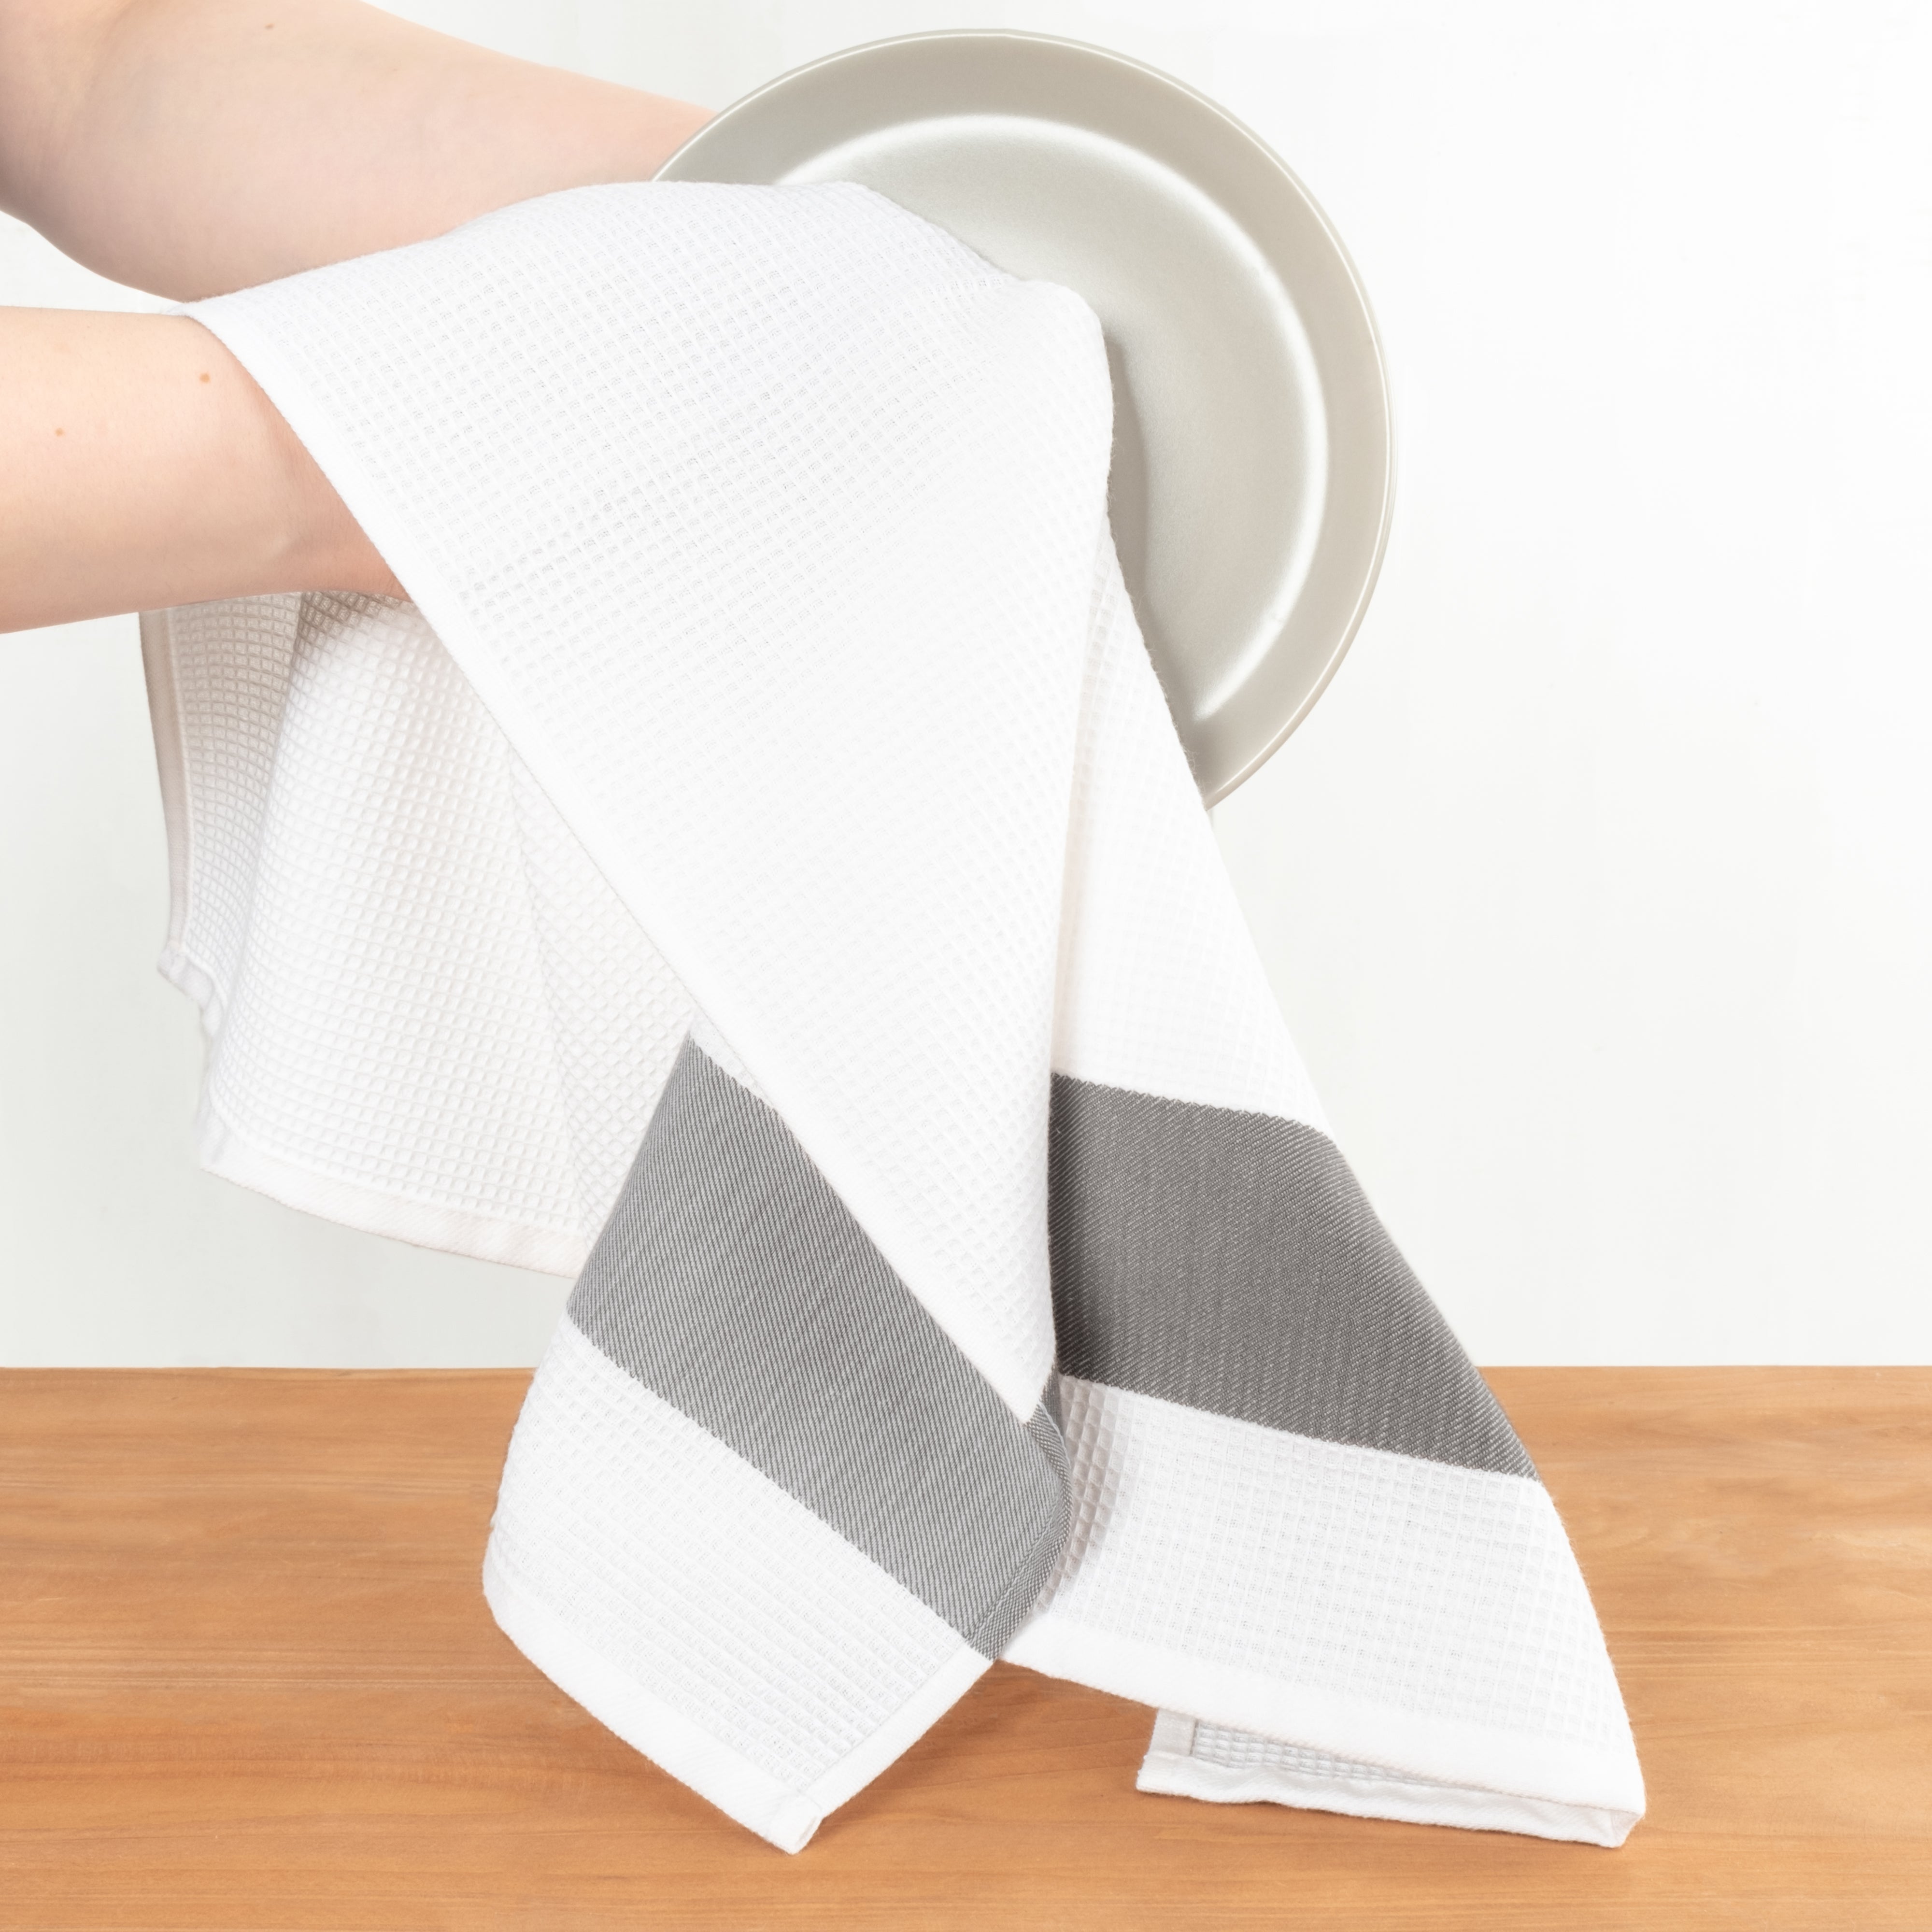 American Soft Linen 4 Packed Dish Towels, 100% Cotton Dish Cloths for Kitchen gray-2